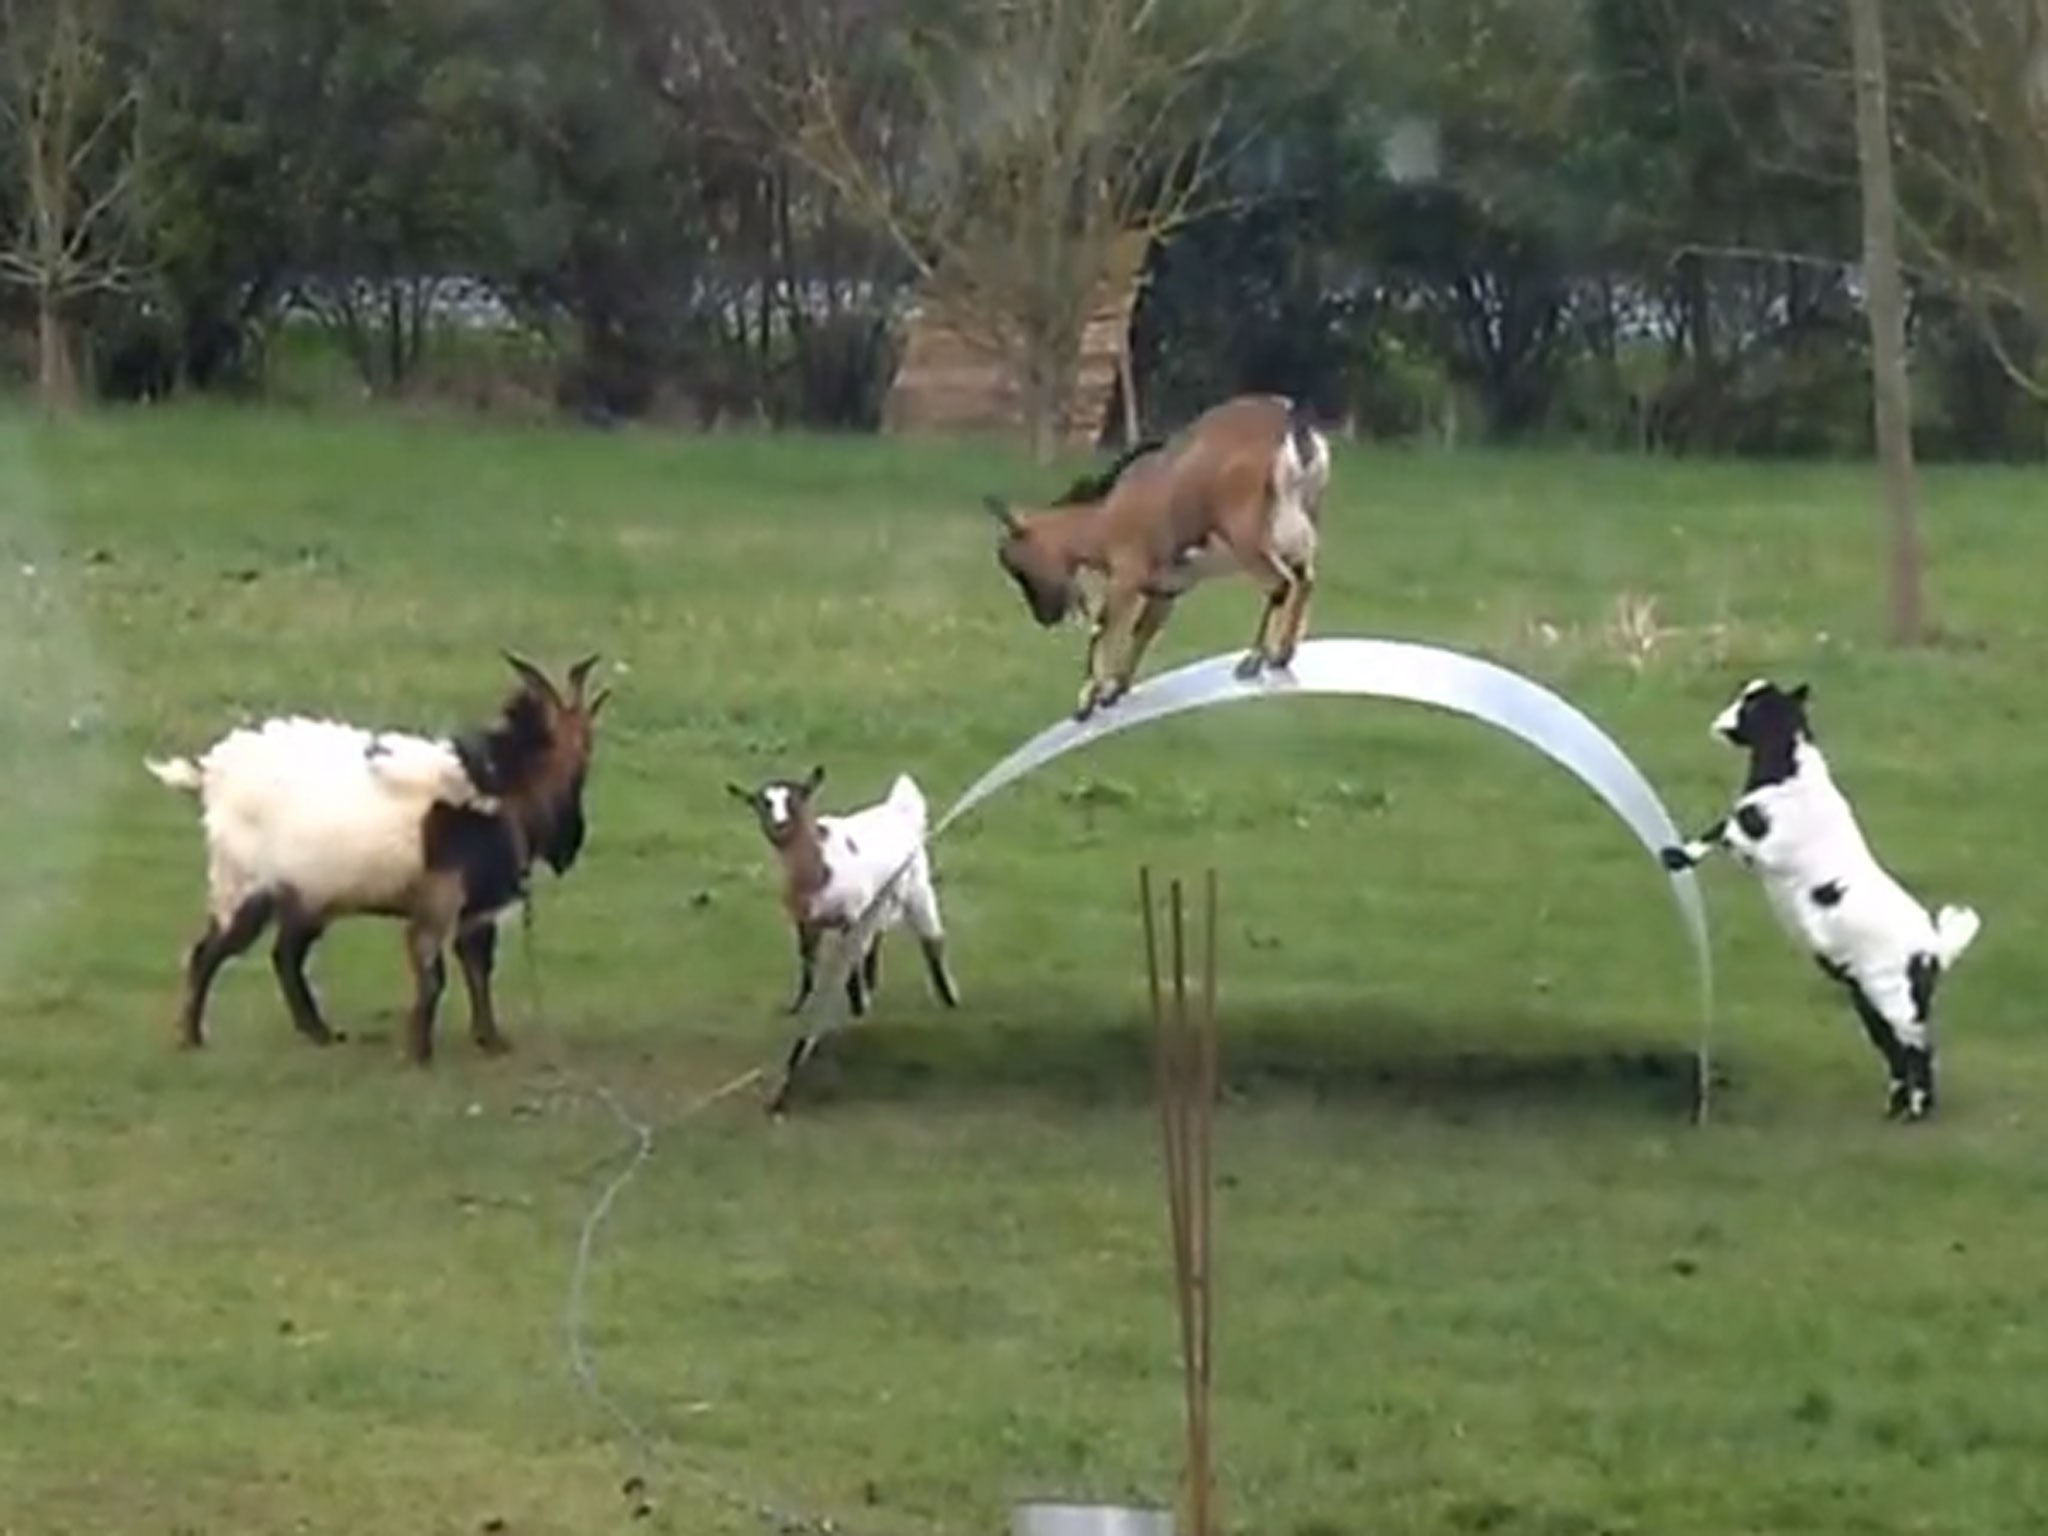 The video, sadly without sound, shows the goats clearly having a great time kidding around in a garden